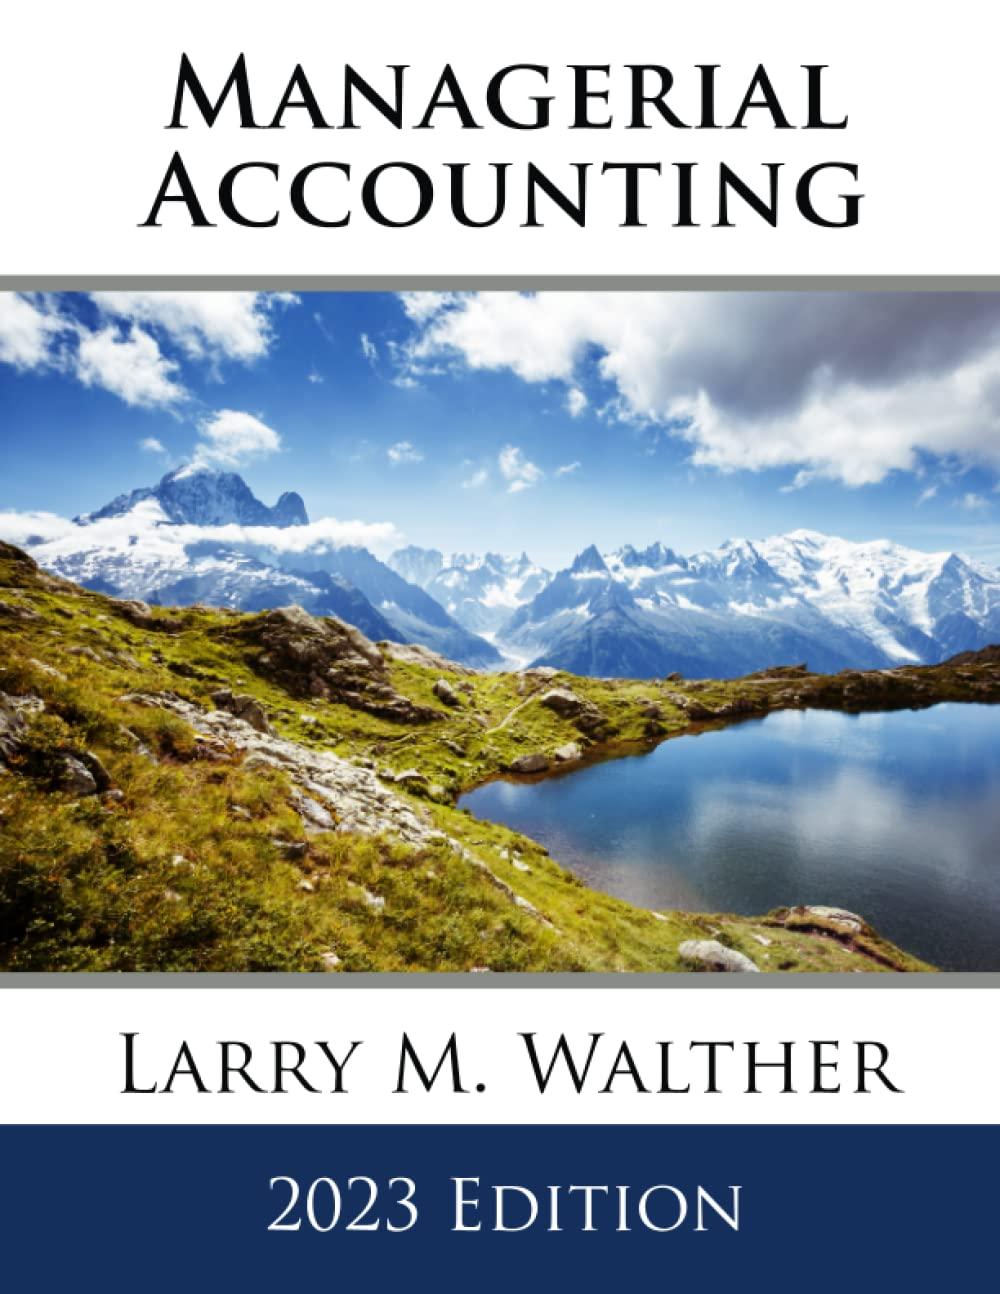 managerial accounting 2023th edition larry m. walther 8375021799, 979-8375021799